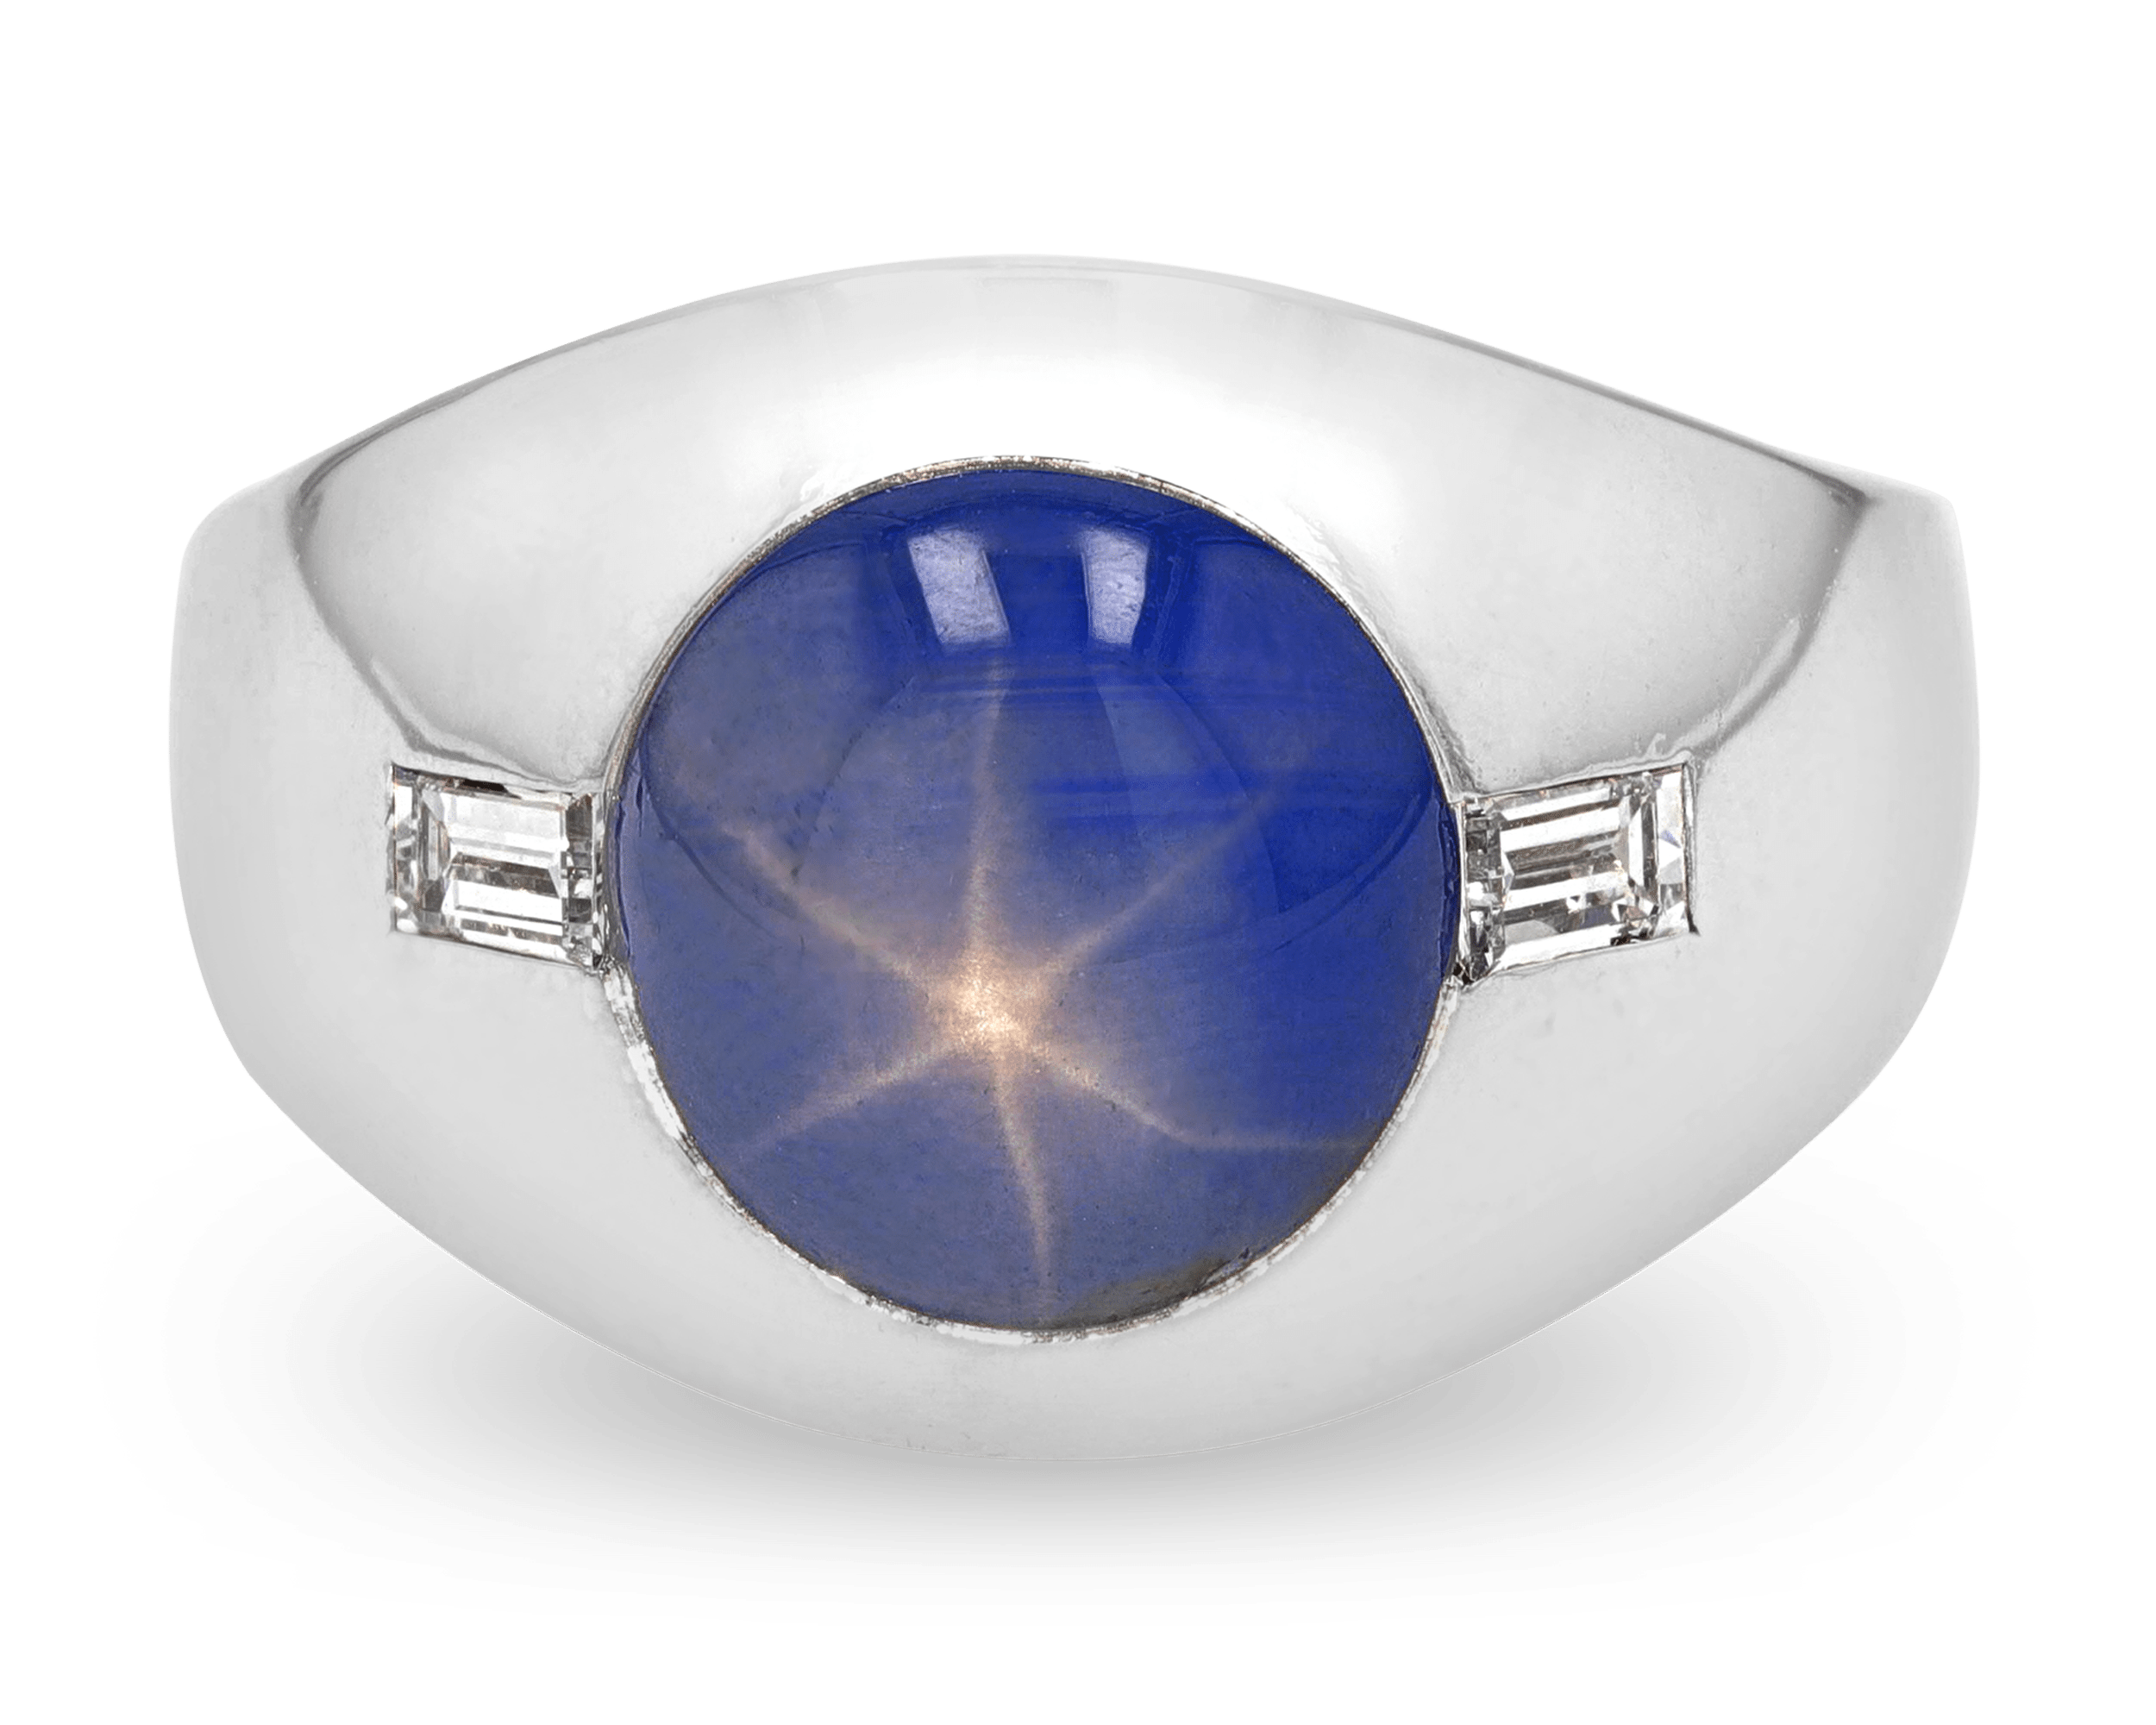 Buy Blue Star Sapphire Ring, 925 Sterling Silver Ring, Lindy Star Sapphire  Ring, Wedding & Engagement Ring, Art Deco Ring, Bridal Ring Online in India  - Etsy